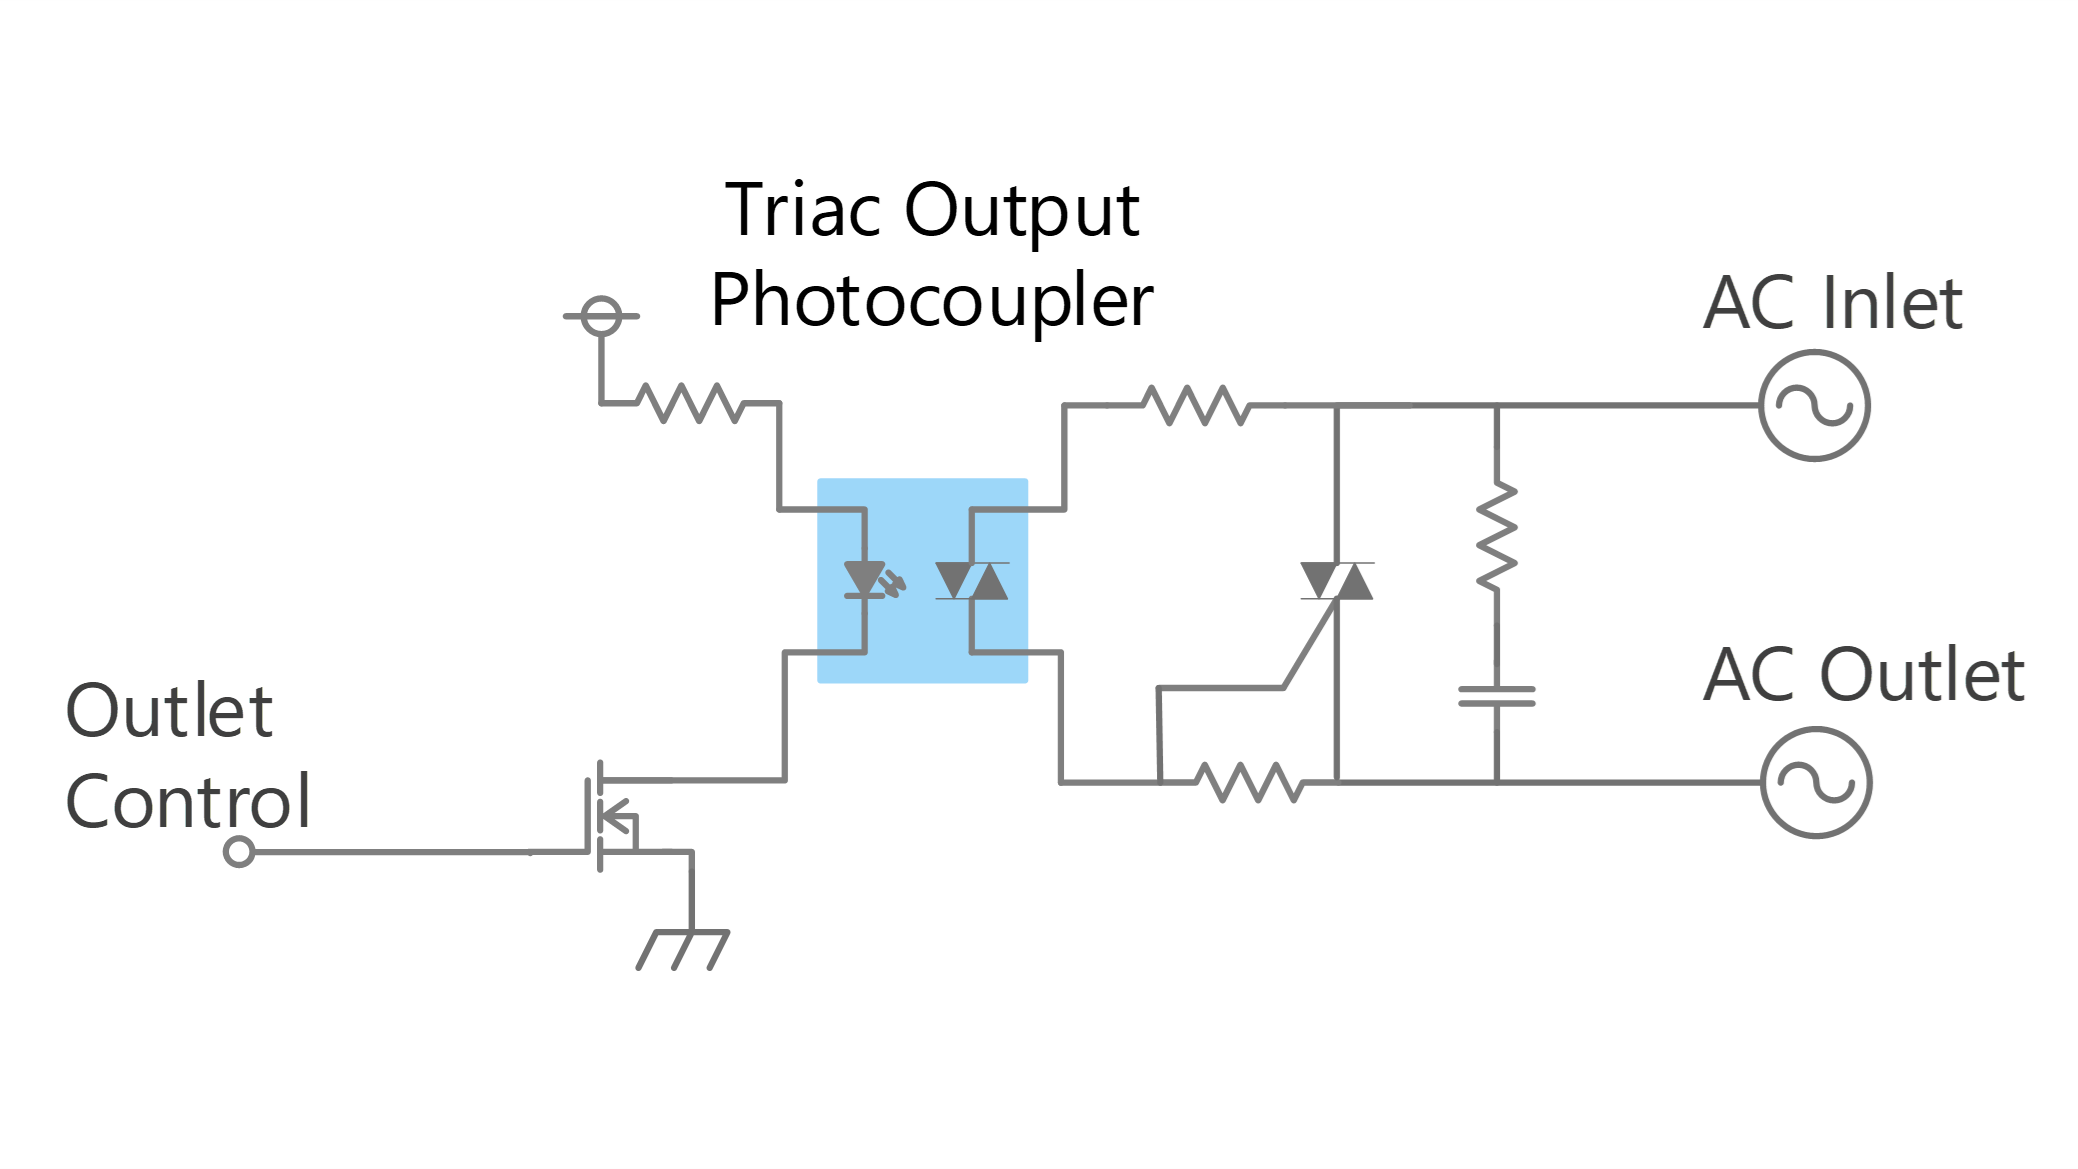 AC switch example using triac and triac output photocoupler (for currents around 1A~)